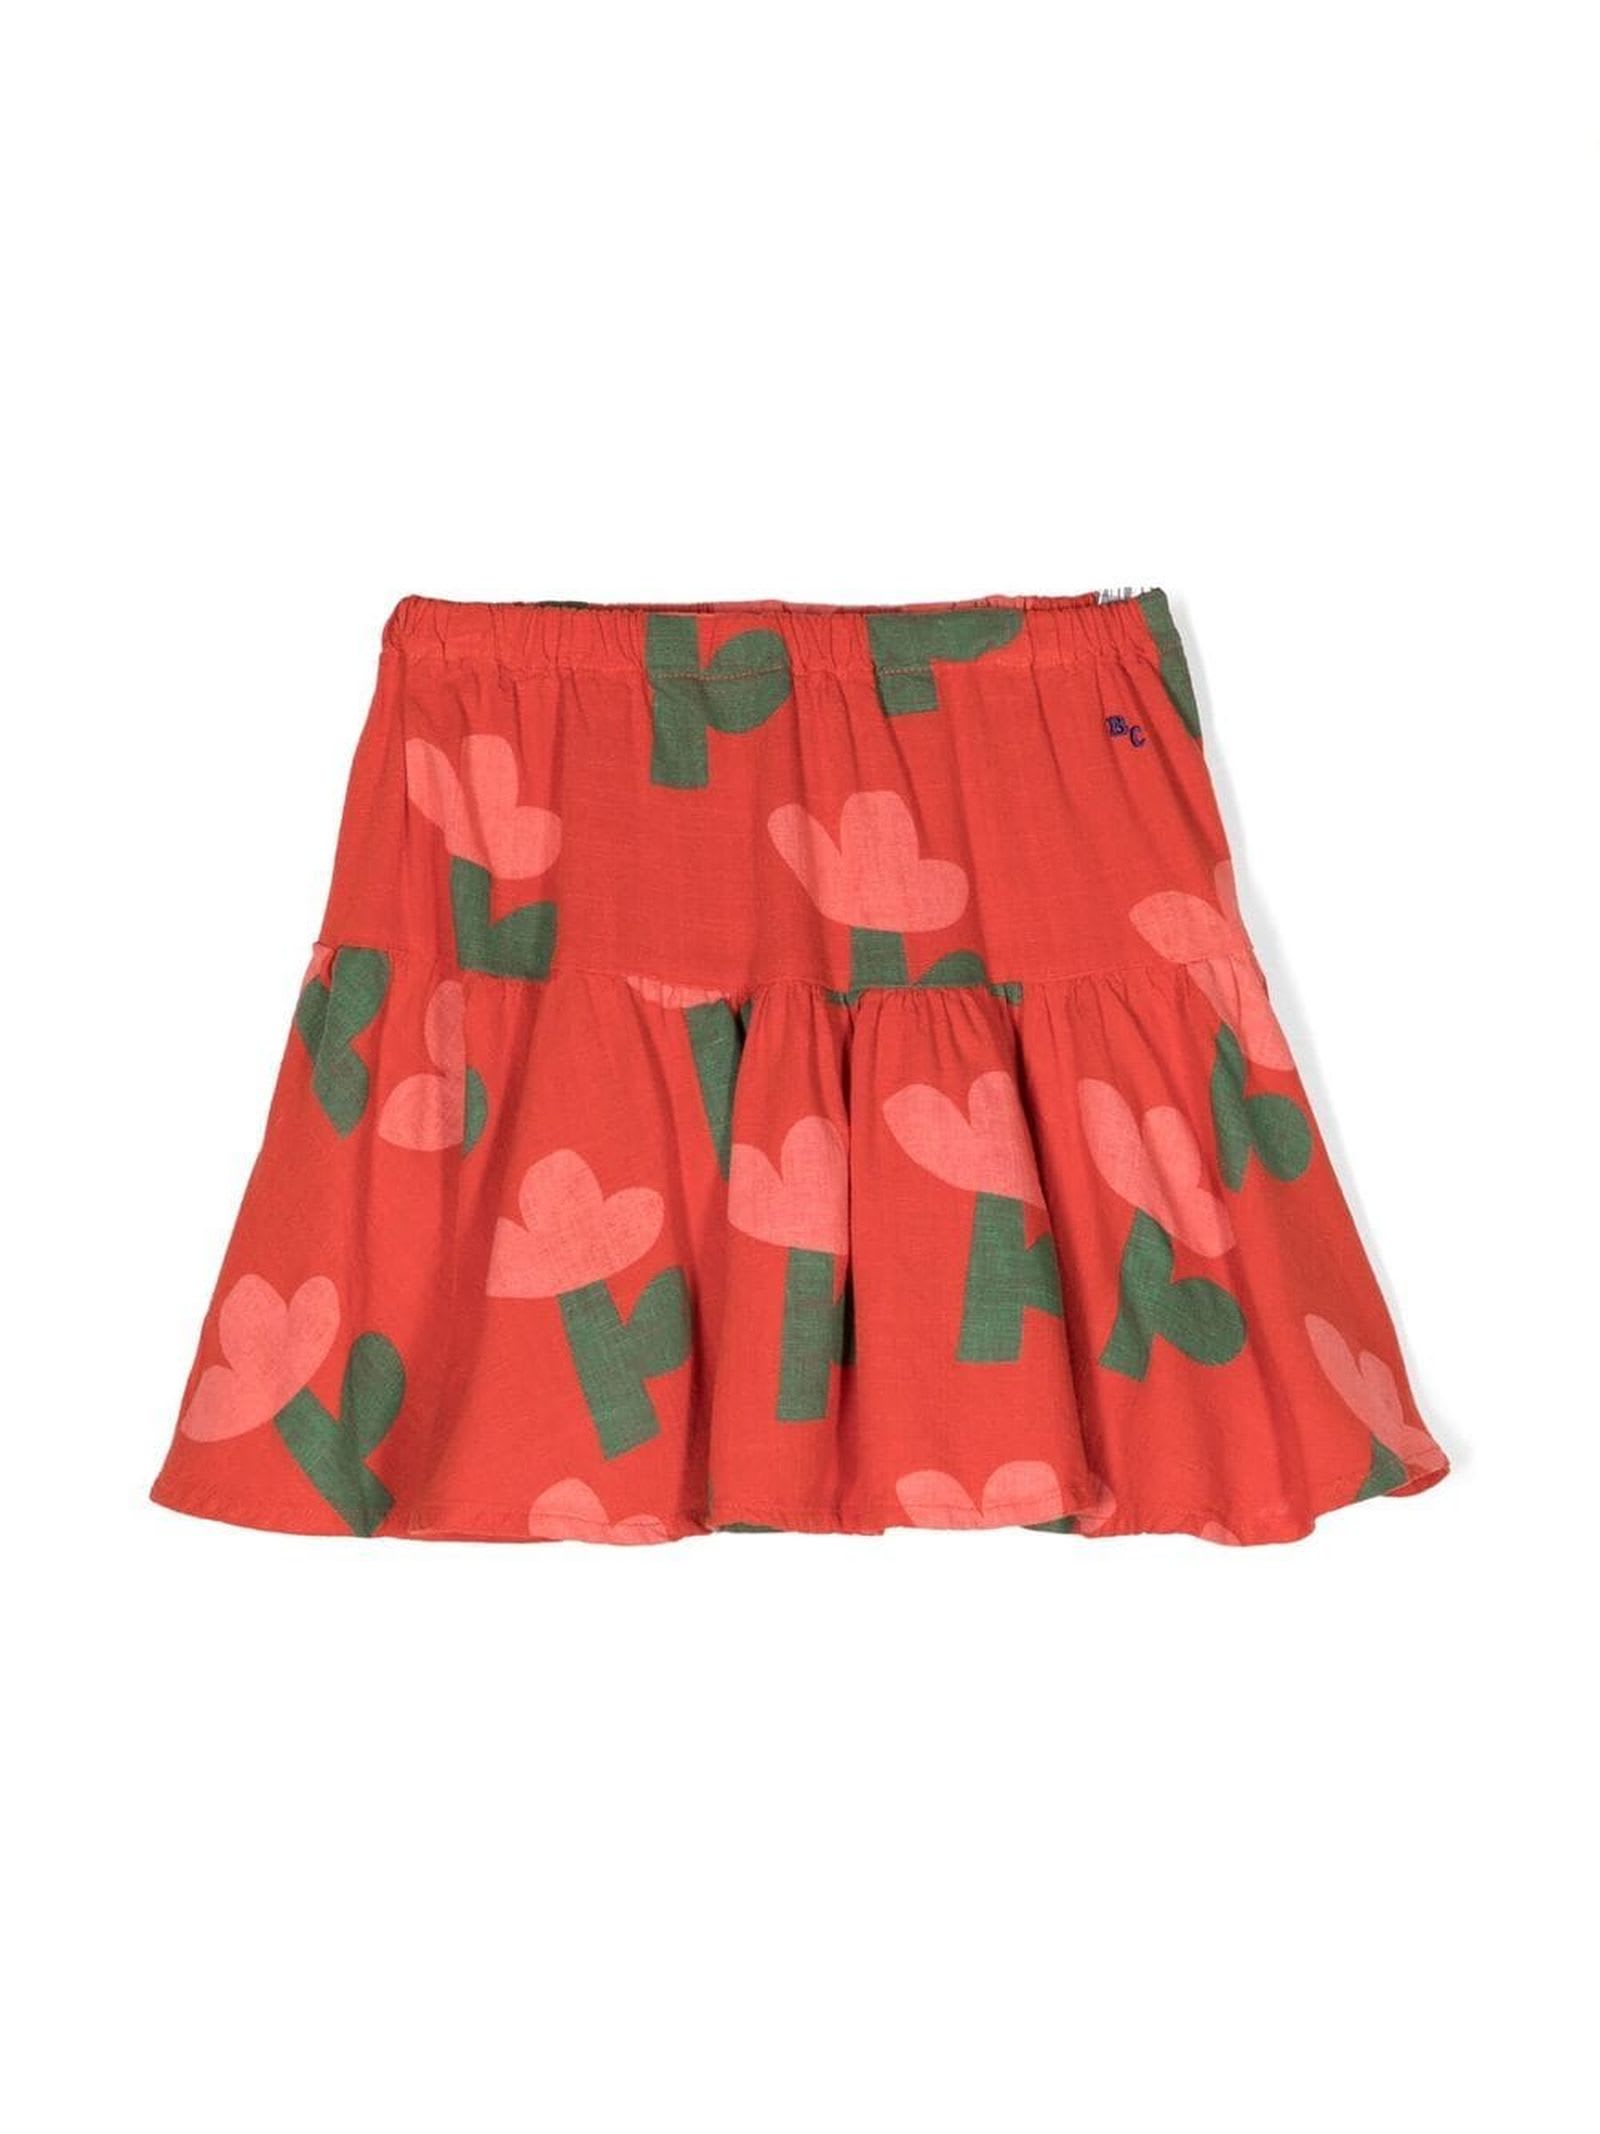 BOBO CHOSES RED COTTON SKIRT